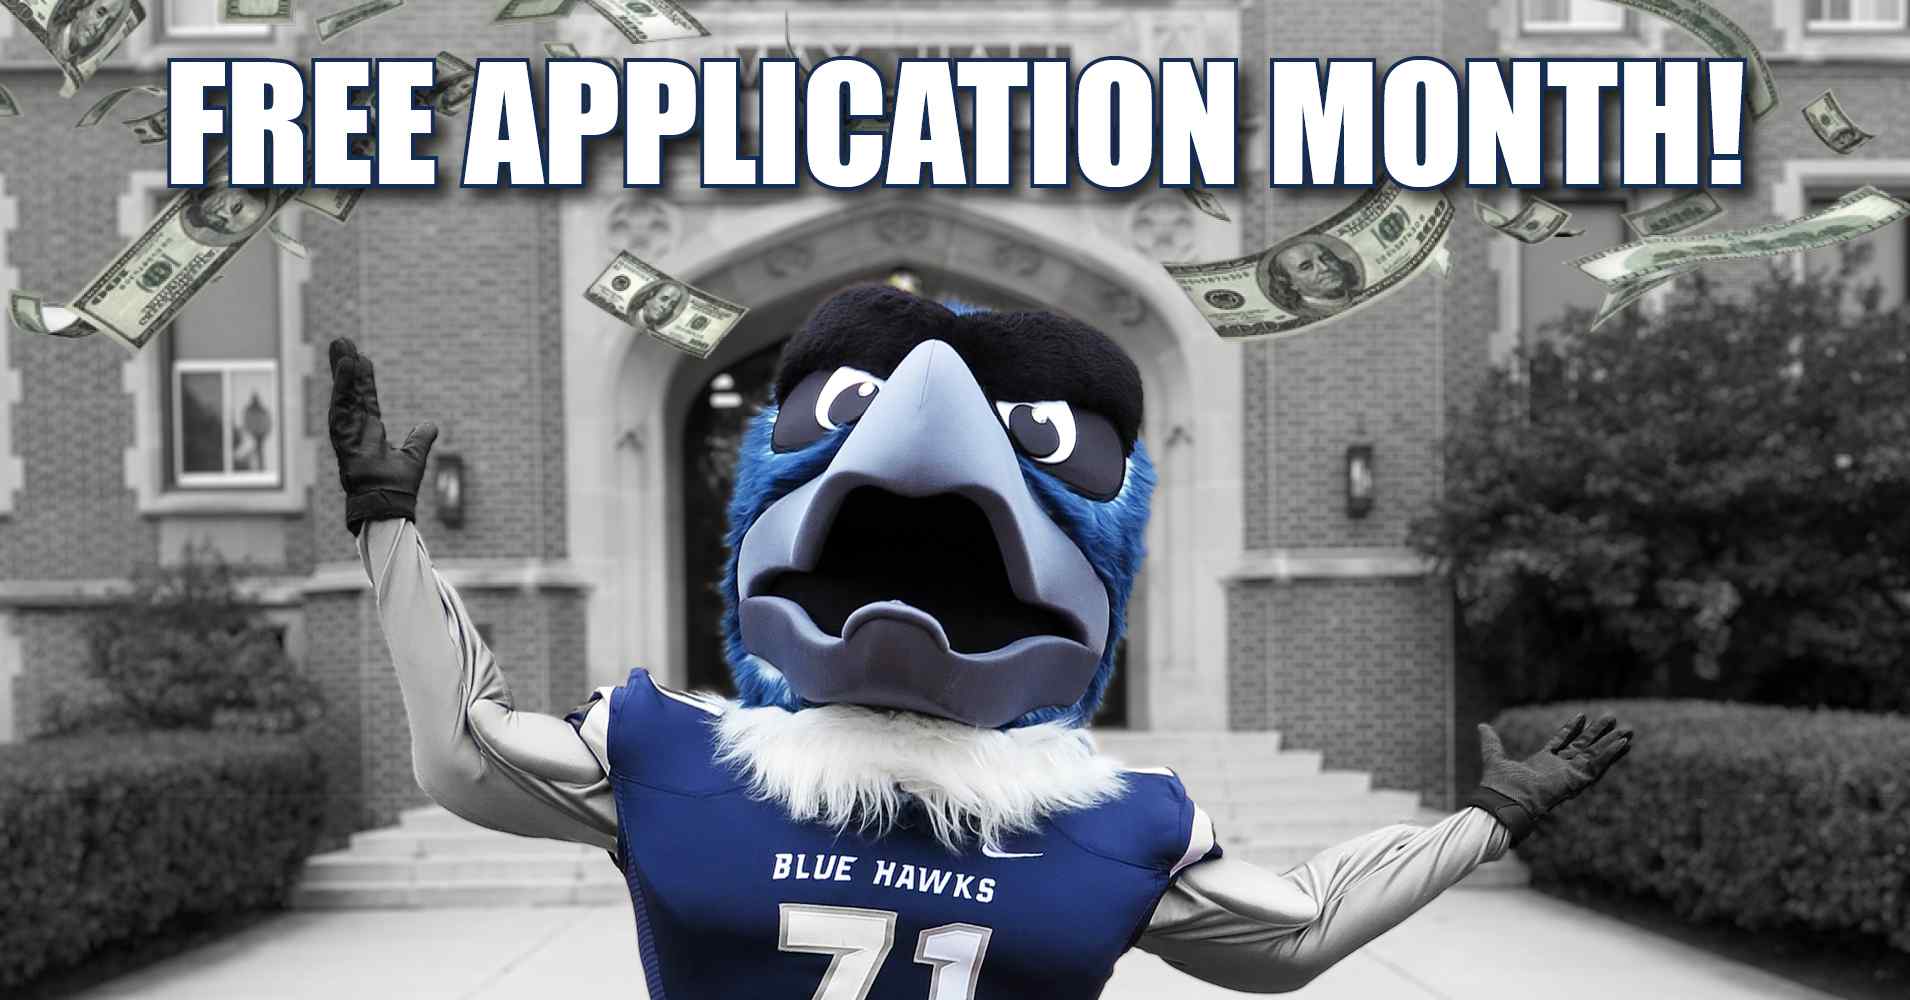 Buster Blue Hawk Mascot with money raining down on him. Free Application Month.